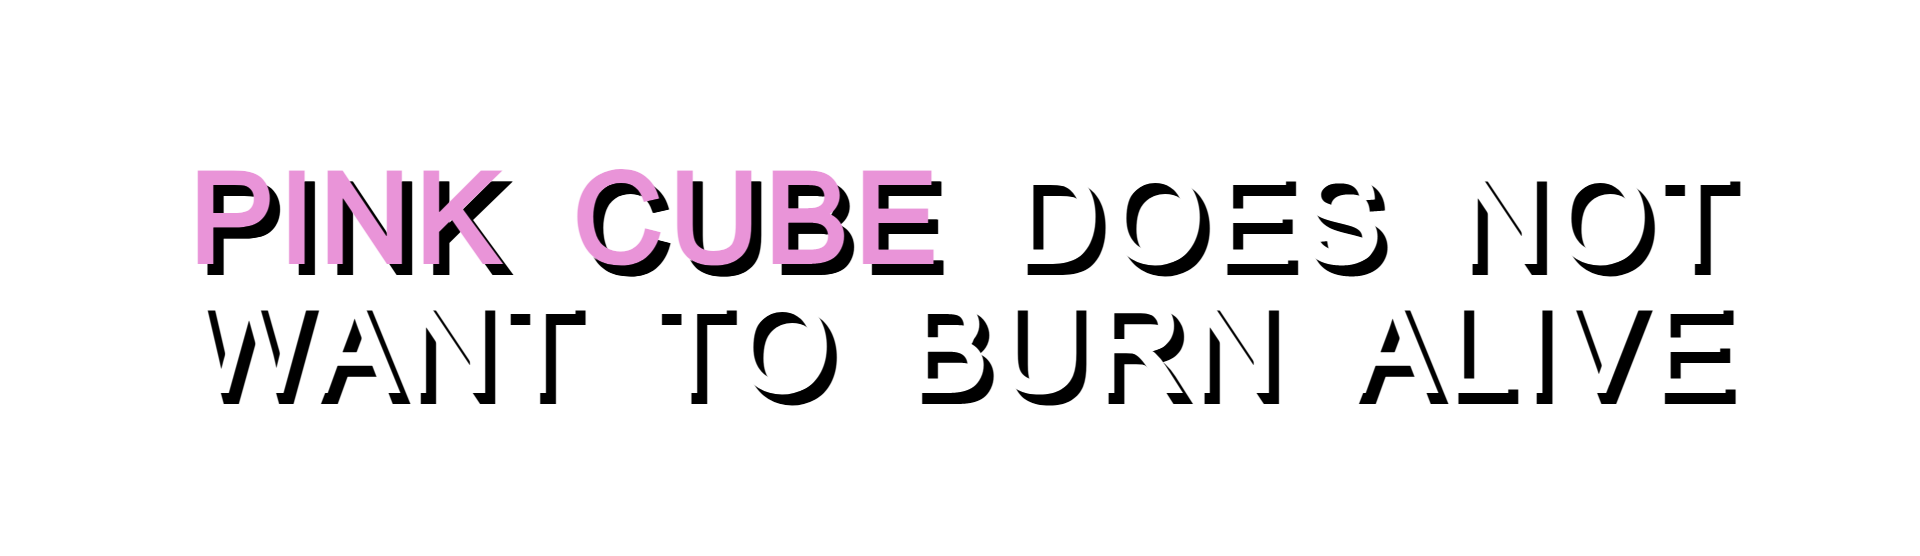 Pink Cube Does Not Want to Burn Alive.